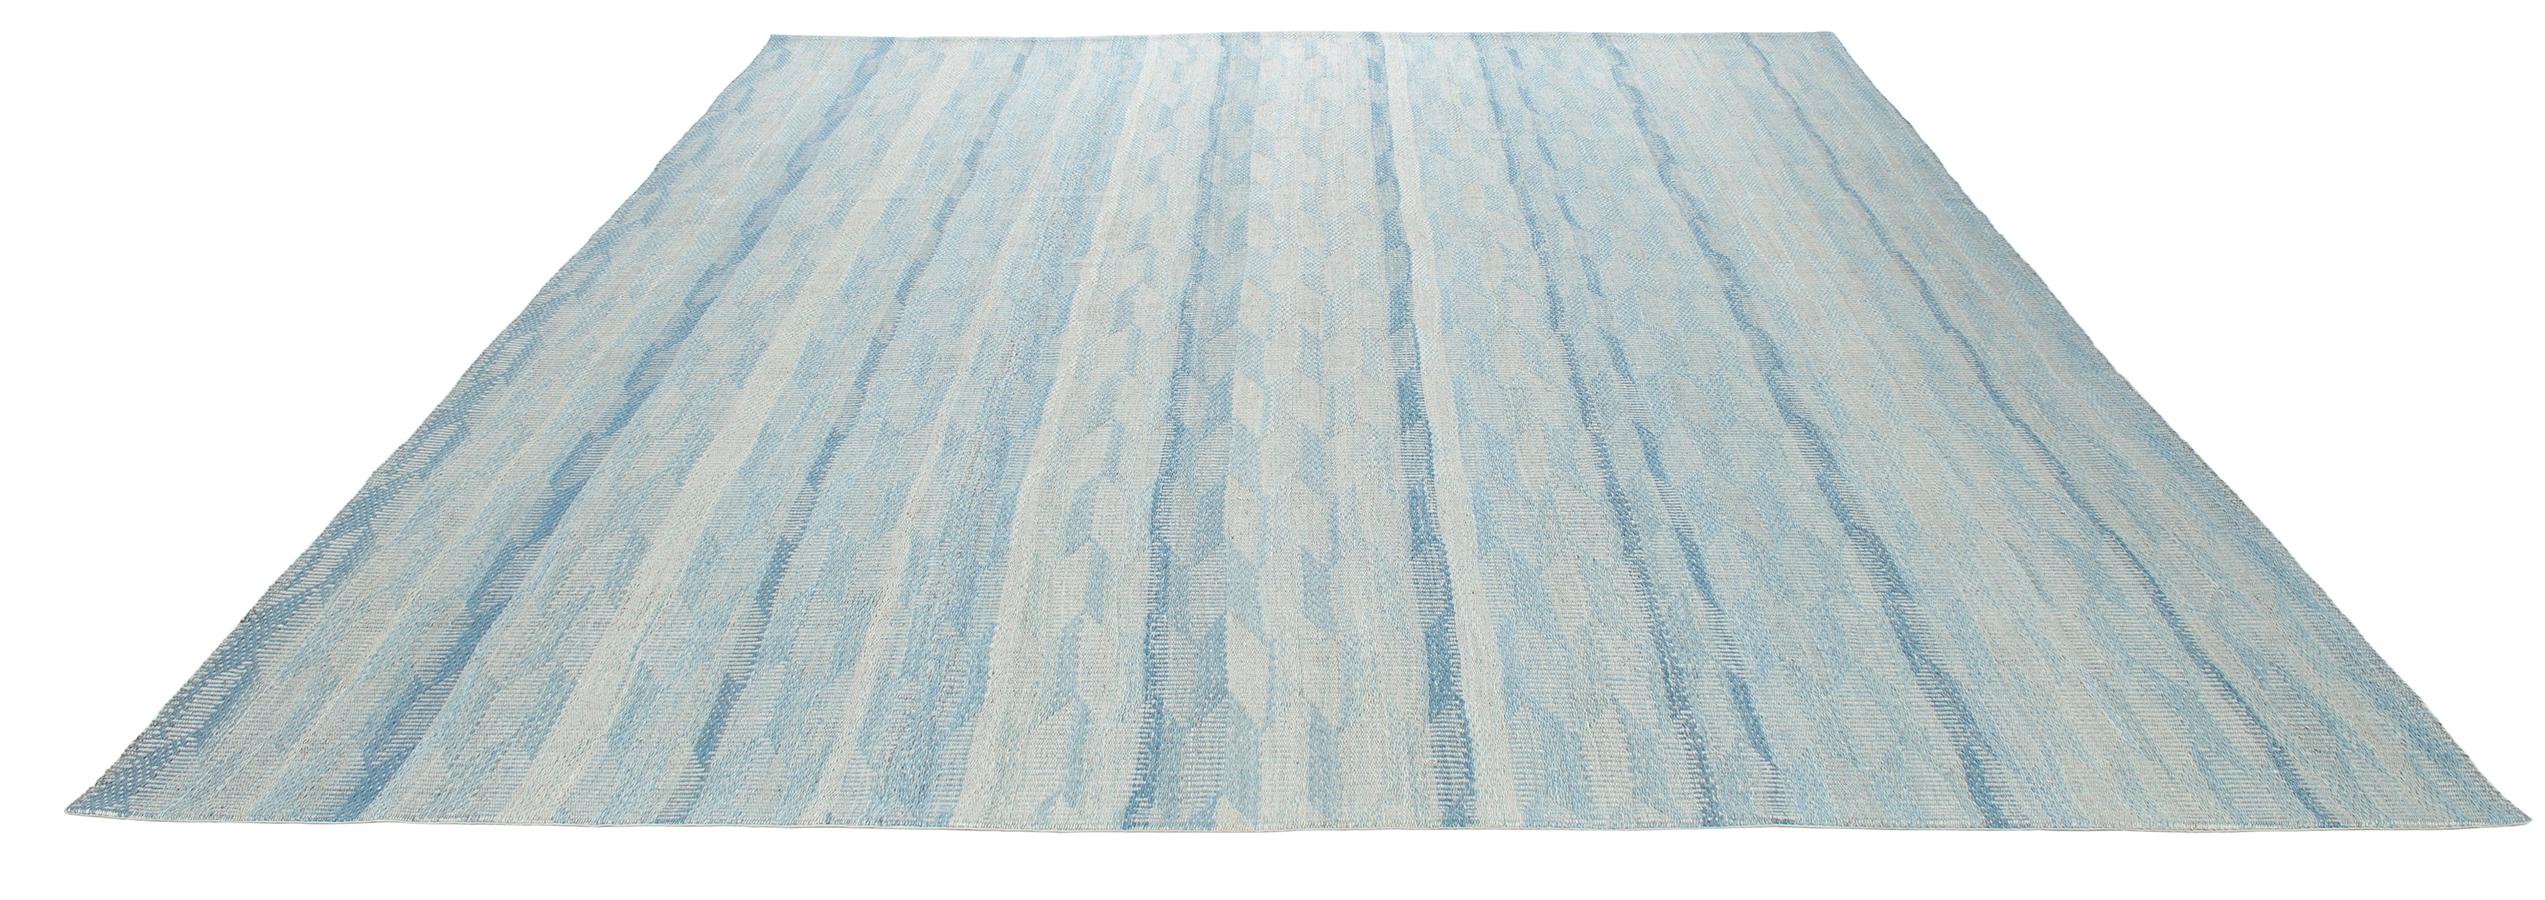 Afghan Modern Unique Handwoven Textured Flat-Weave Rug in Shades of Blue For Sale